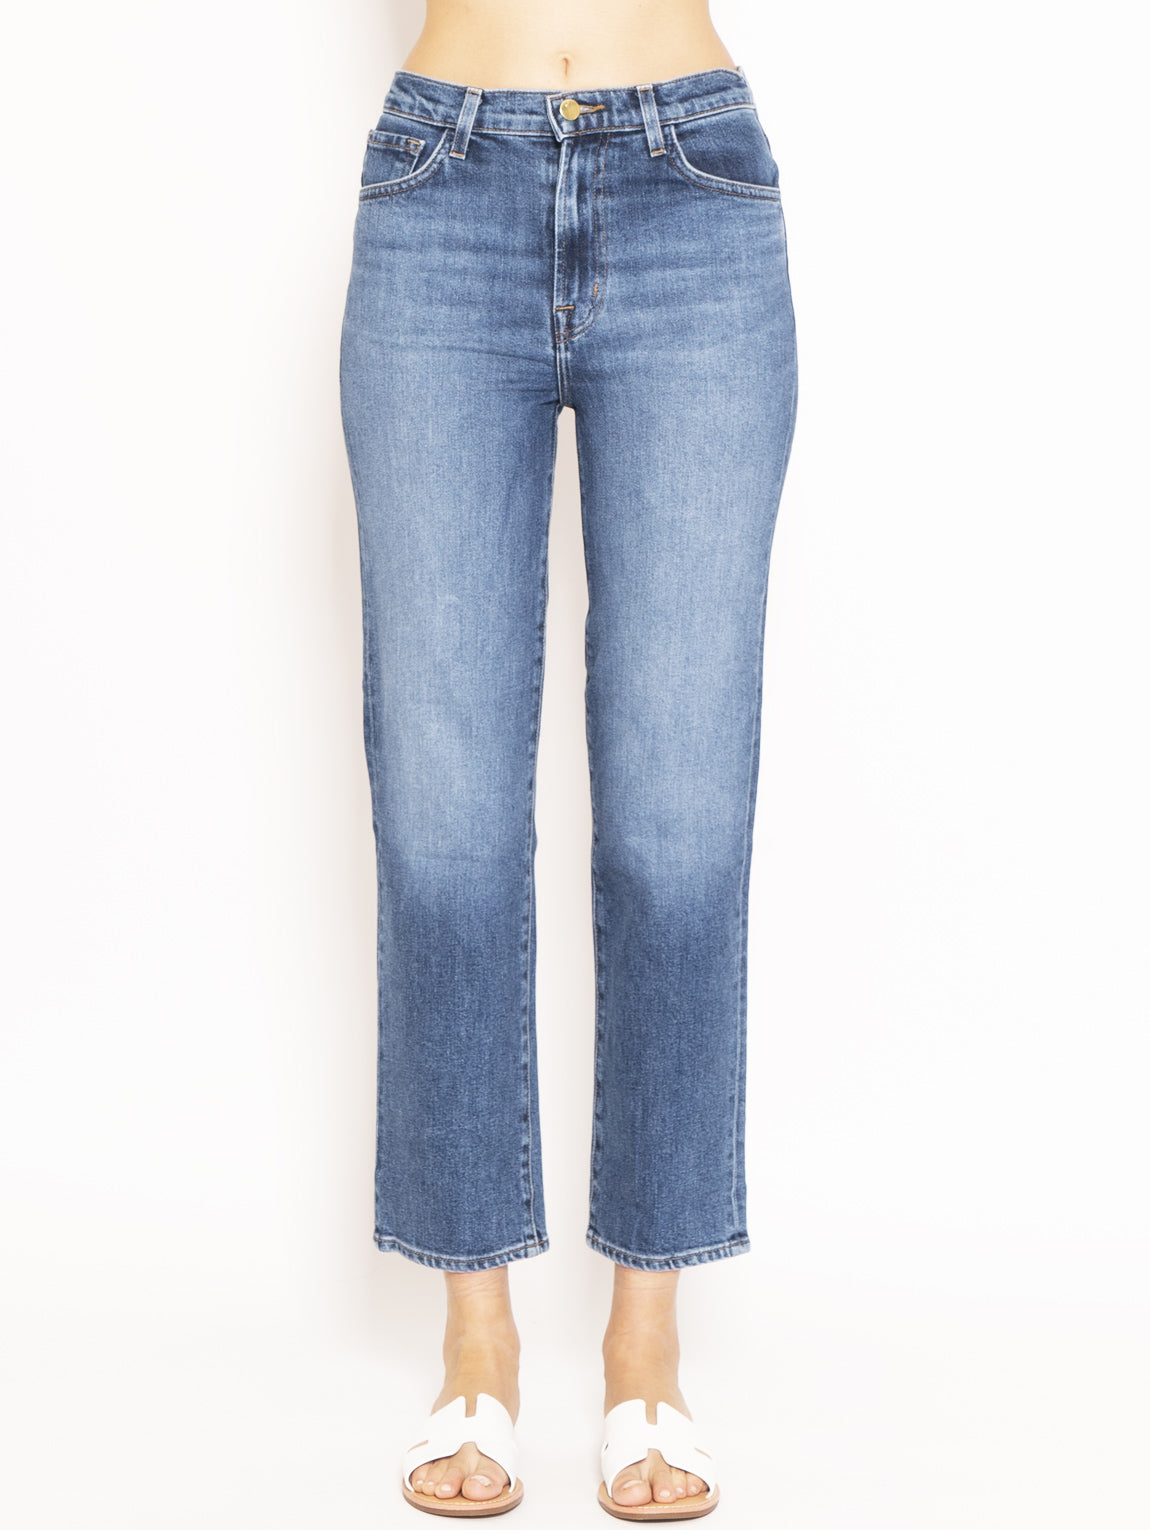 J BRAND-Jeans Sostenibile Jules High Rise Ankle Straight Blu-TRYME Shop